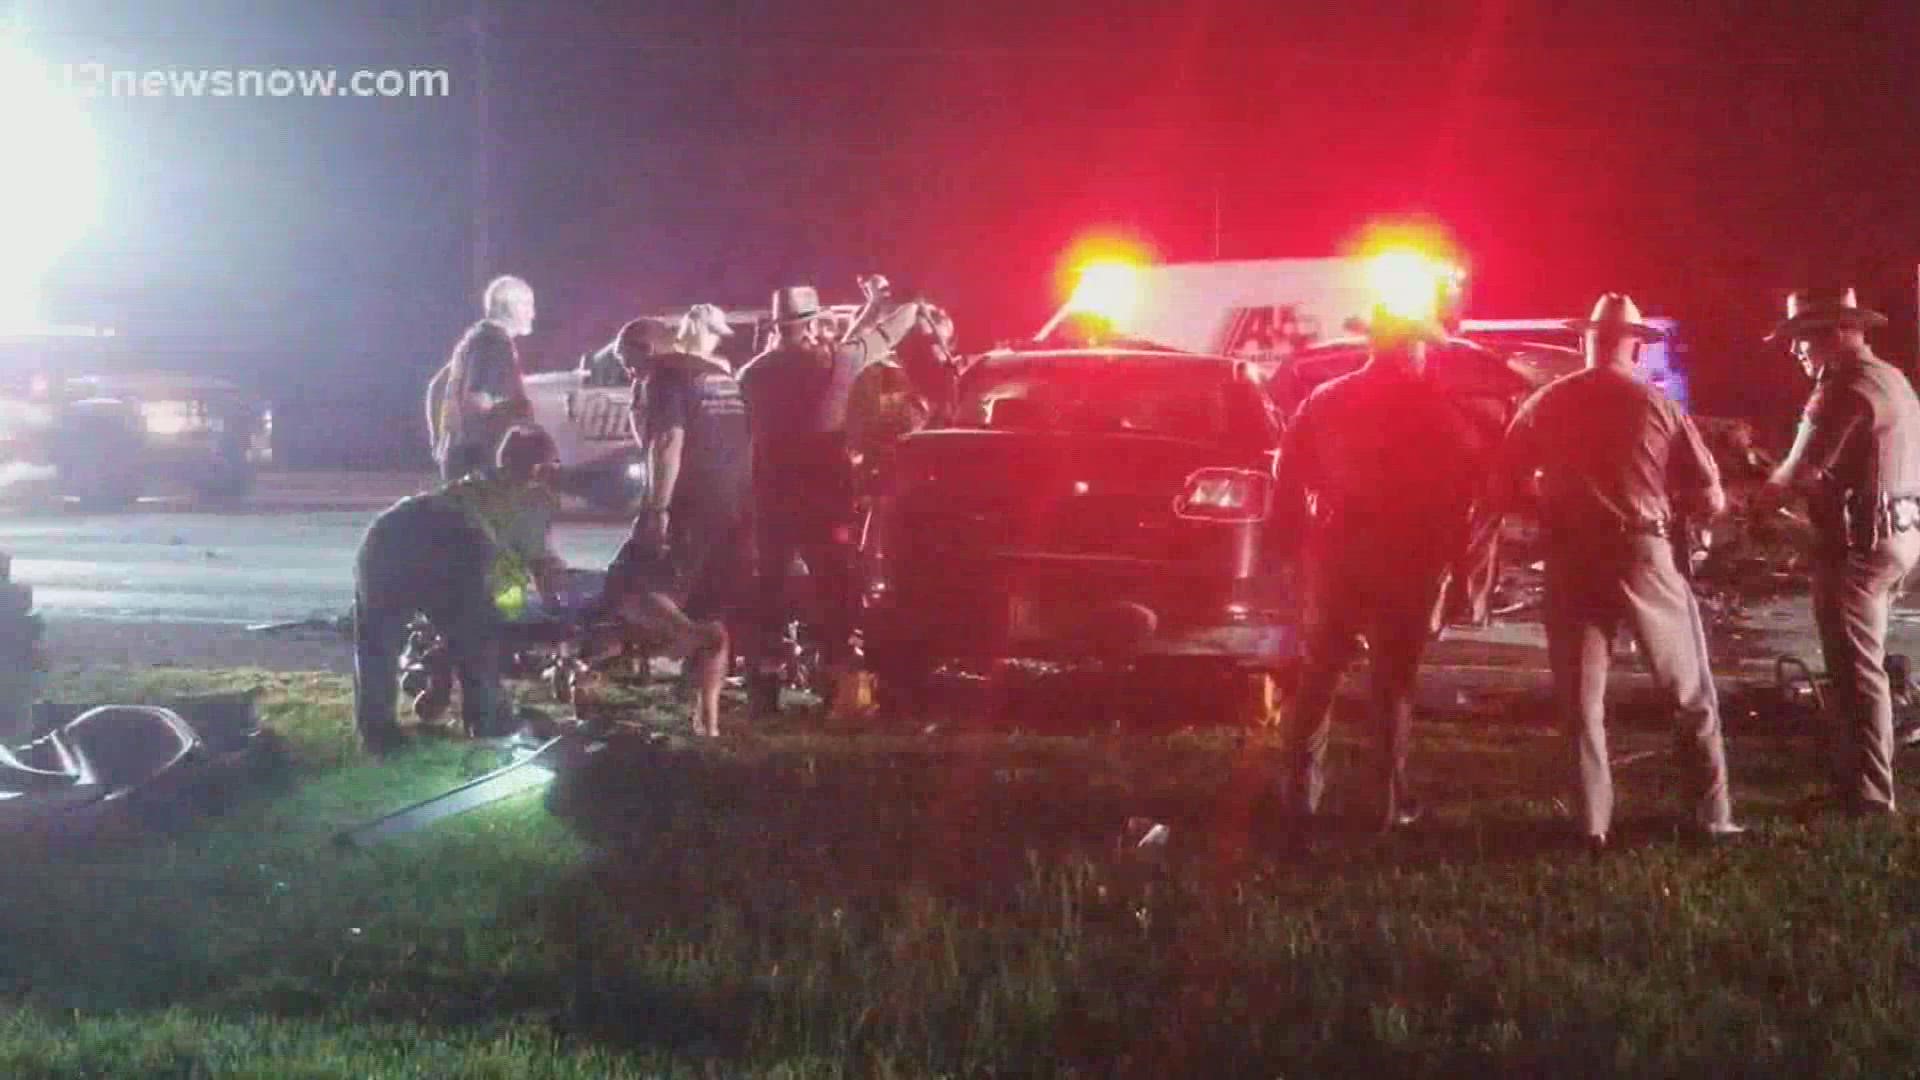 A woman was killed in a head-on wreck Tuesday night along Texas 62 in Orange on Tuesday night.